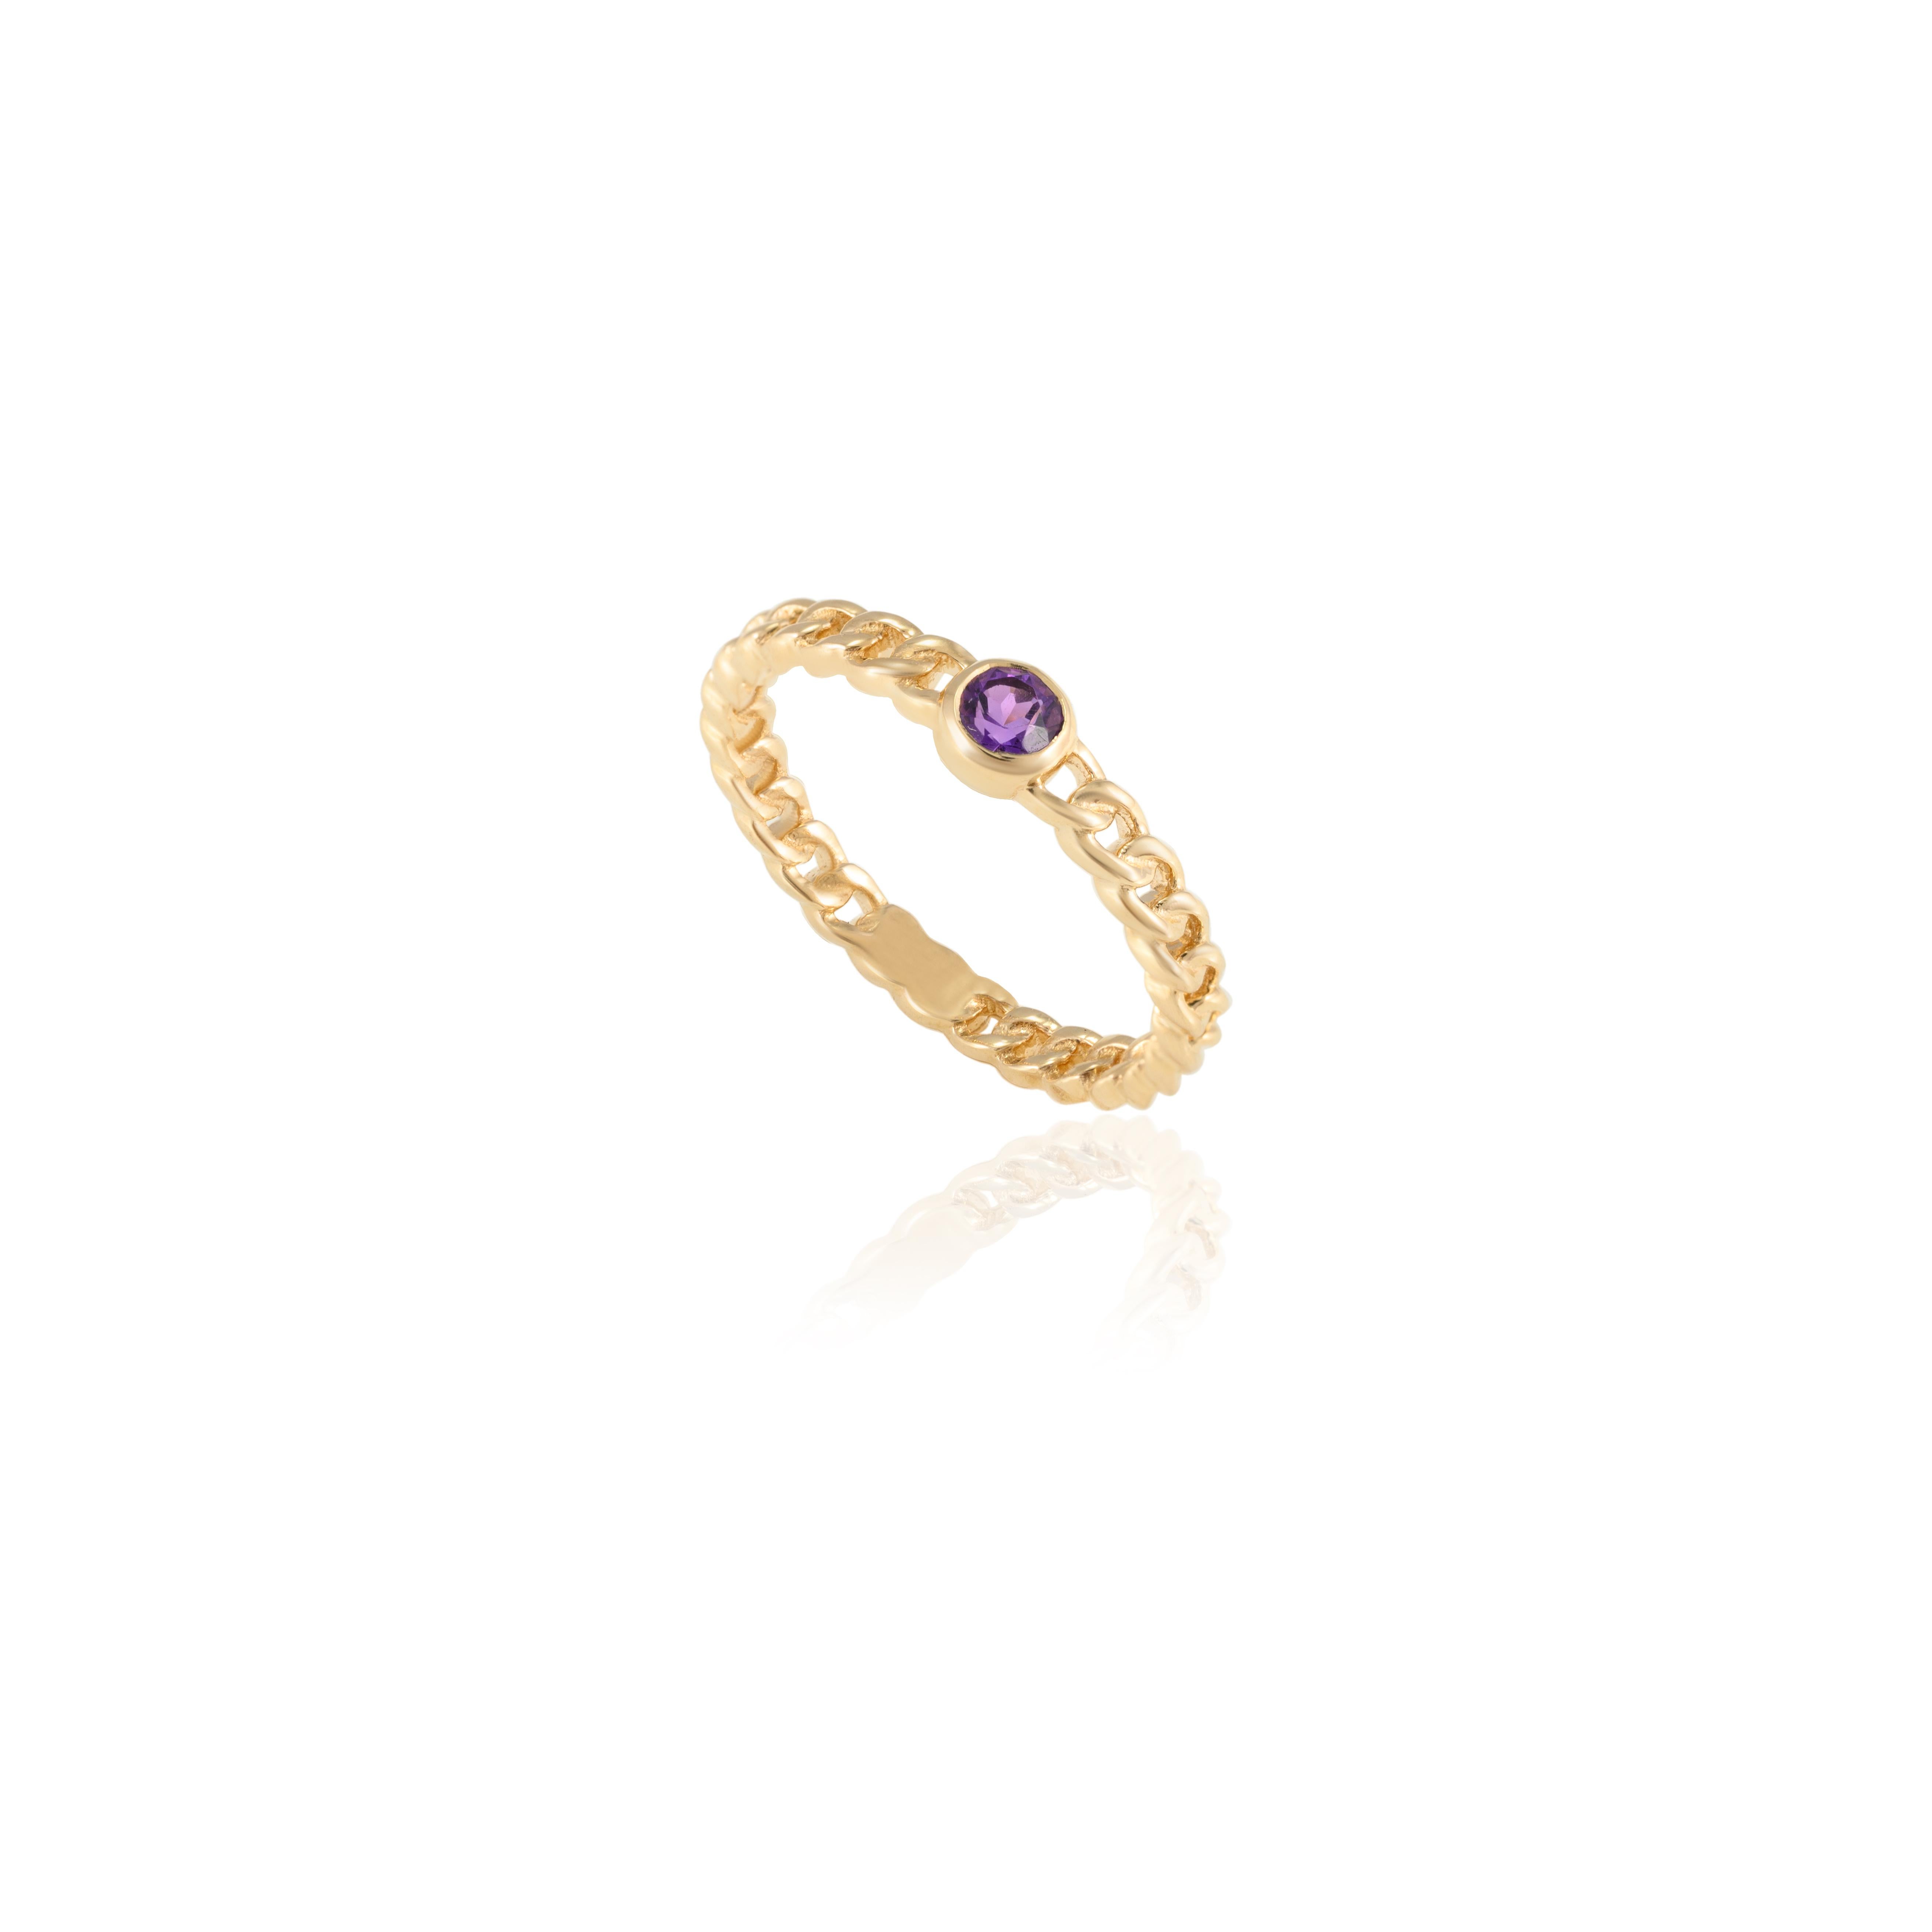 For Sale:  Dainty Round Amethyst Everyday Chain Ring Handcrafted in 14k Solid Yellow Gold 5